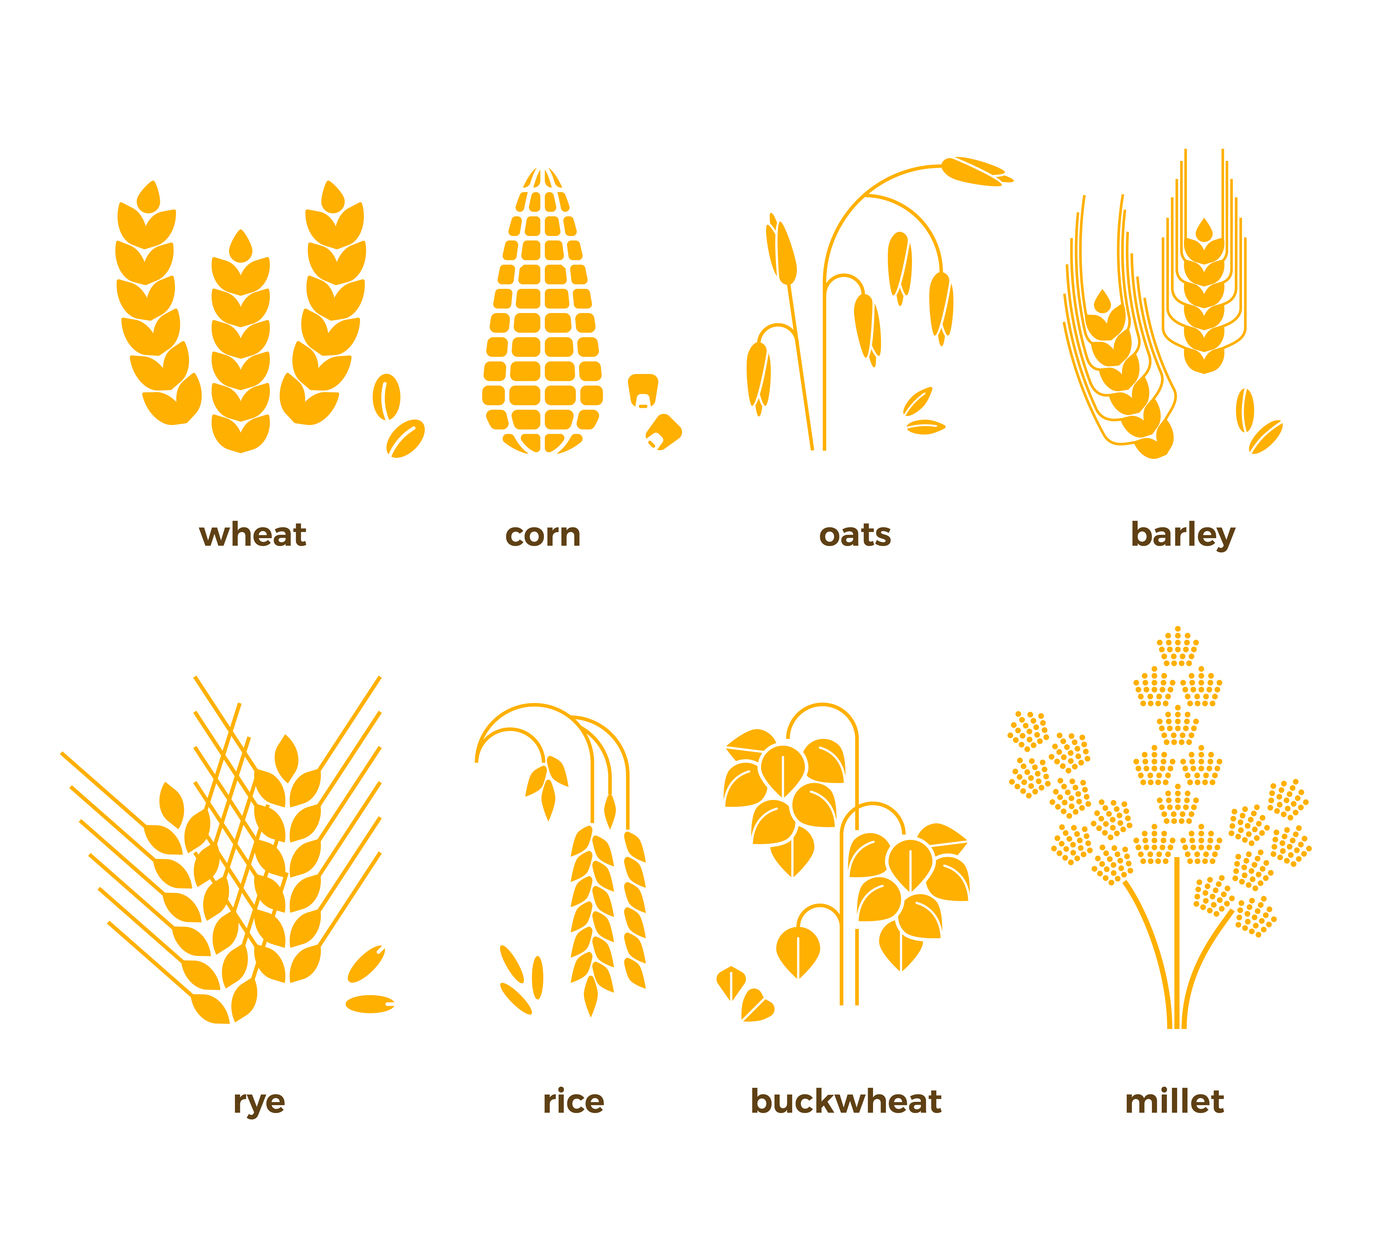 Cereal Grains Vector Icons Rice Wheat Corn Oats Rye Barley By Microvector Thehungryjpeg Com